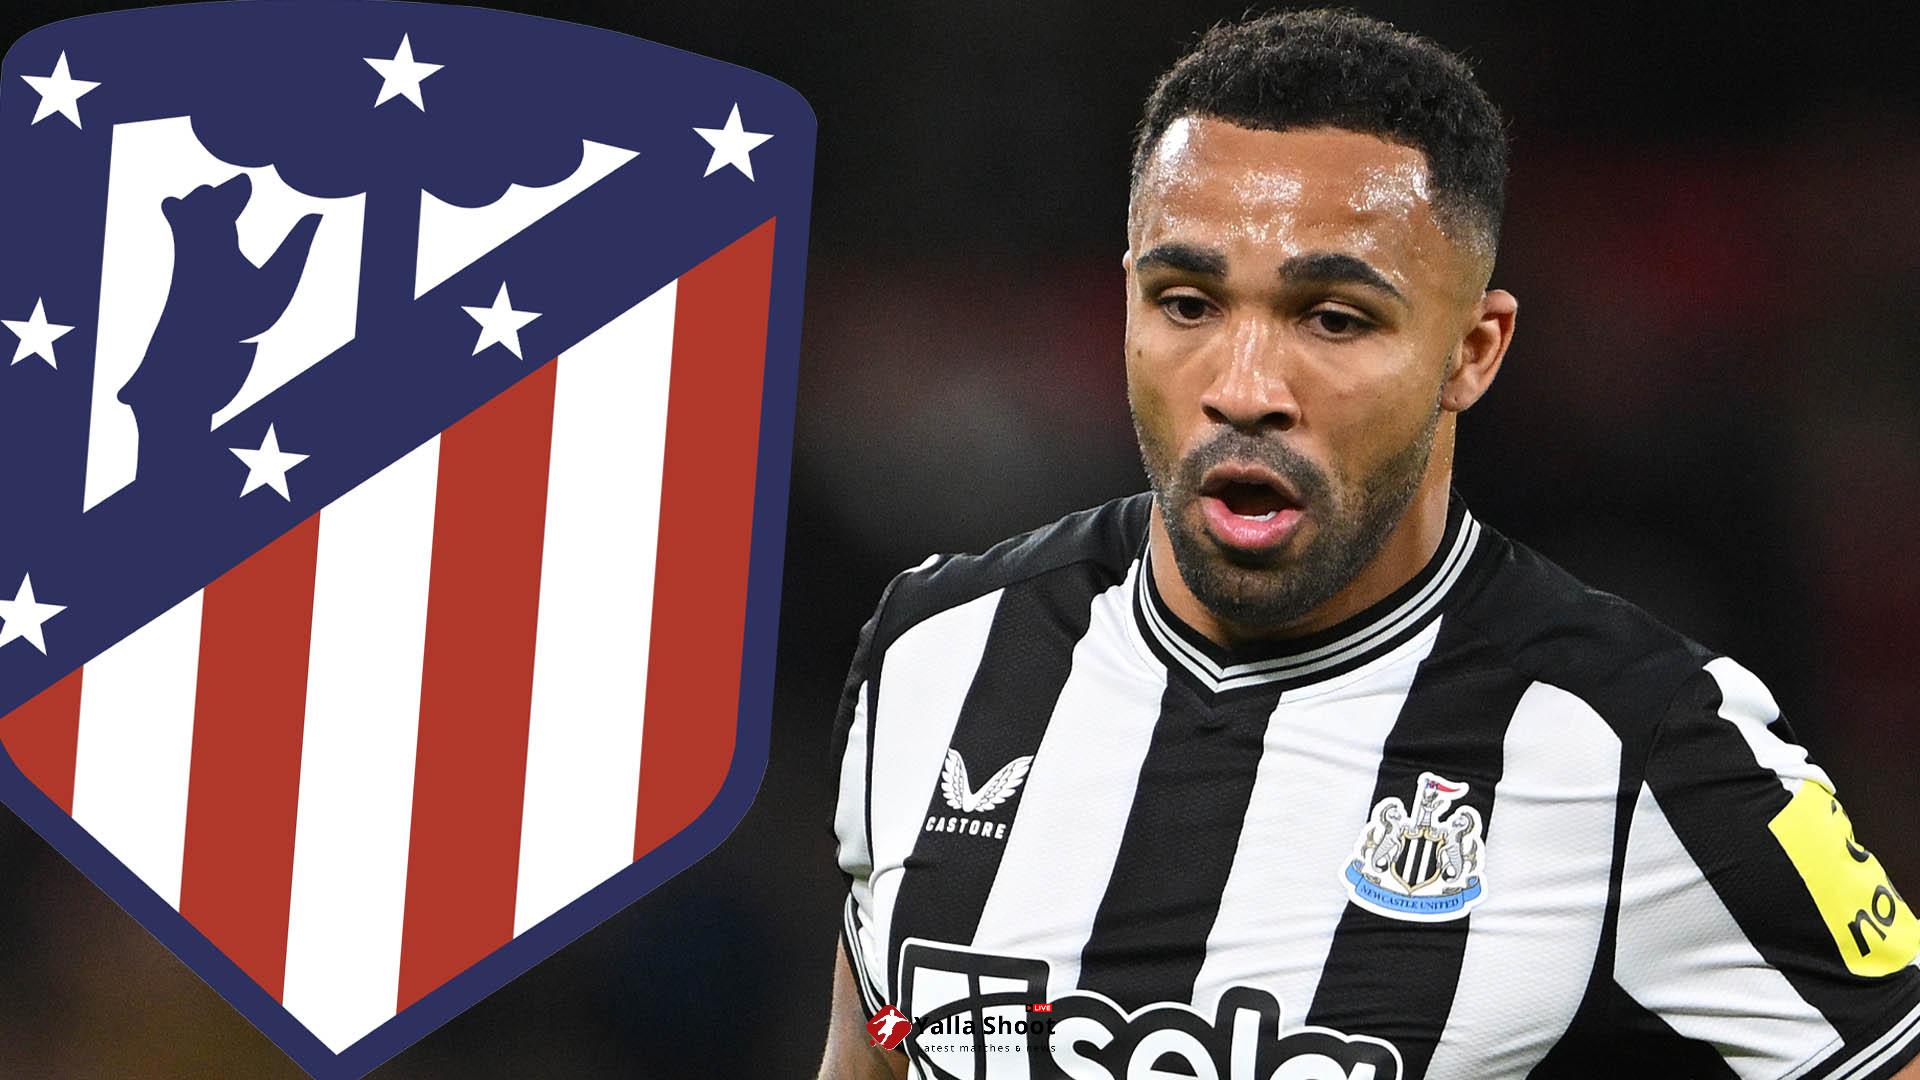 Newcastle REJECT shock loan transfer offer from Atletico Madrid for Callum Wilson but FFP could force them to sell